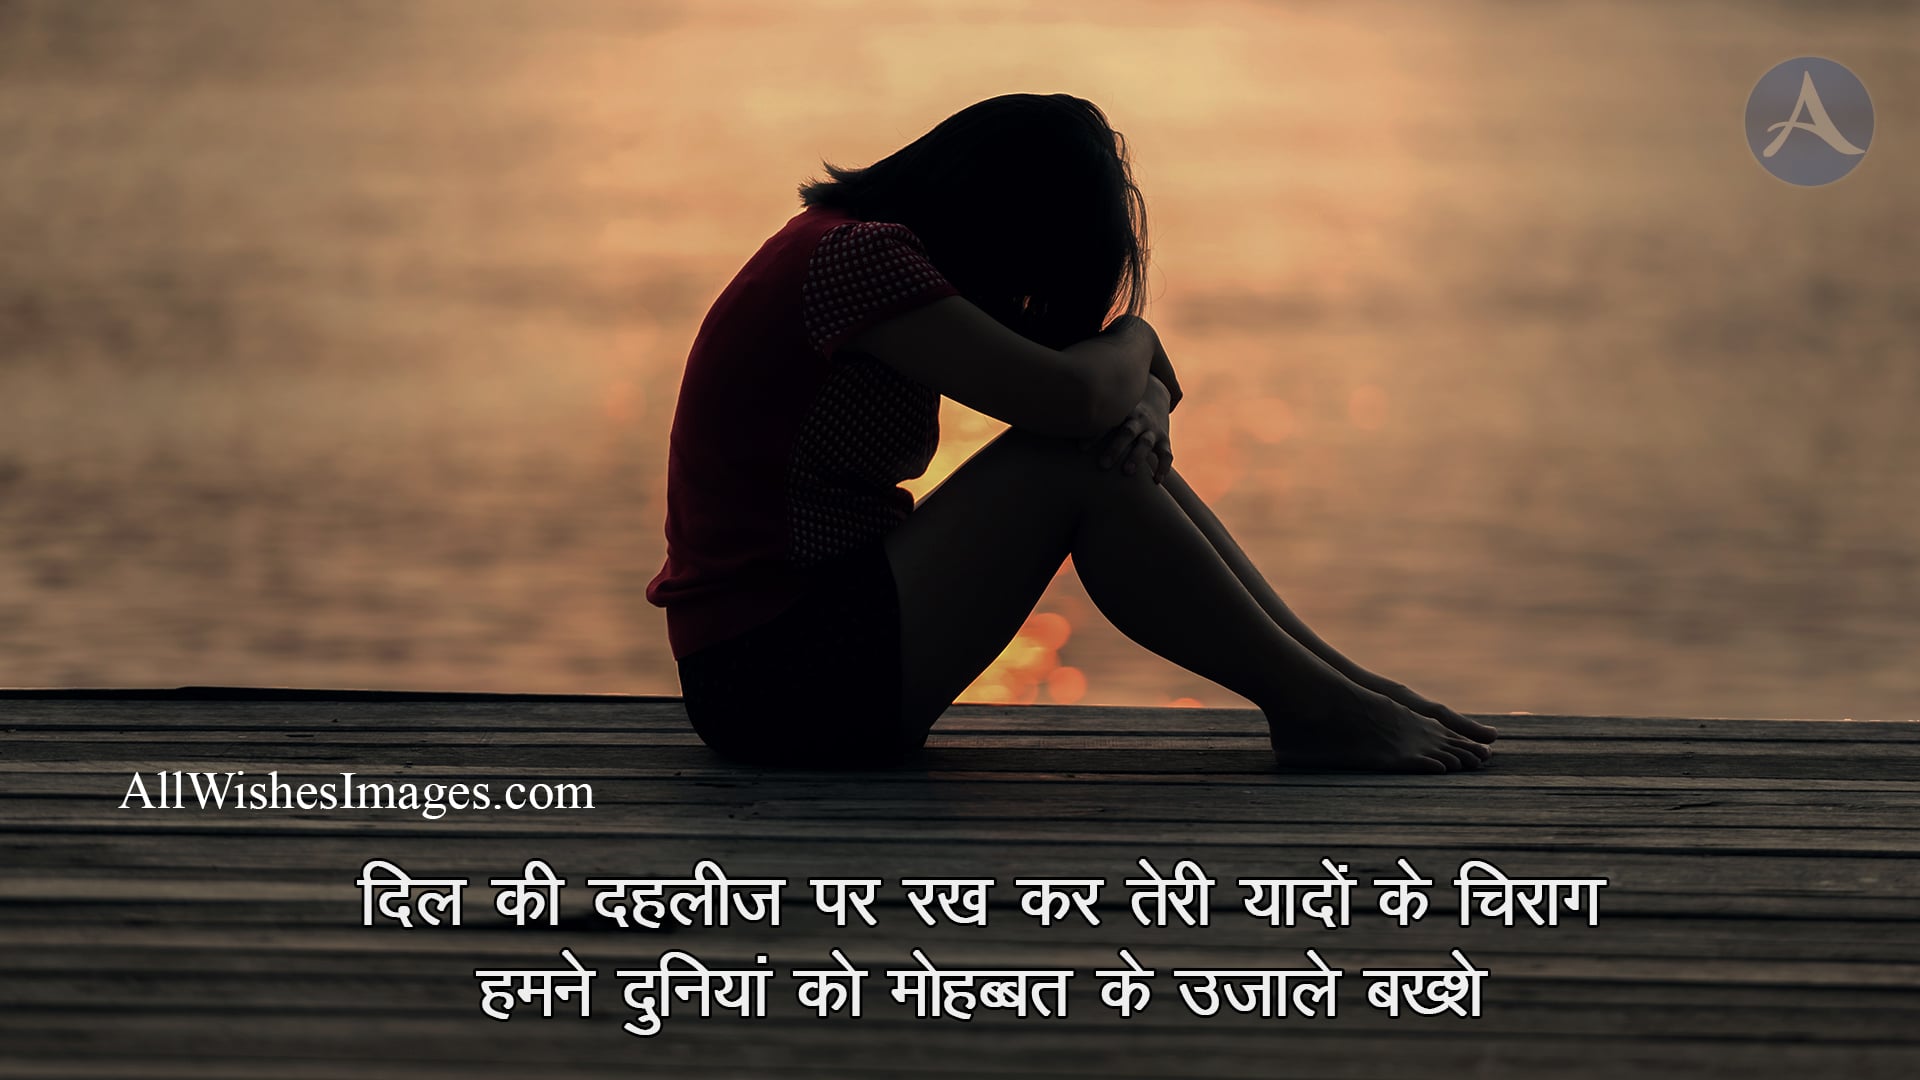 Dard Bhari Shayari With Images Free Download - All Wishes Images - Images  for WhatsApp